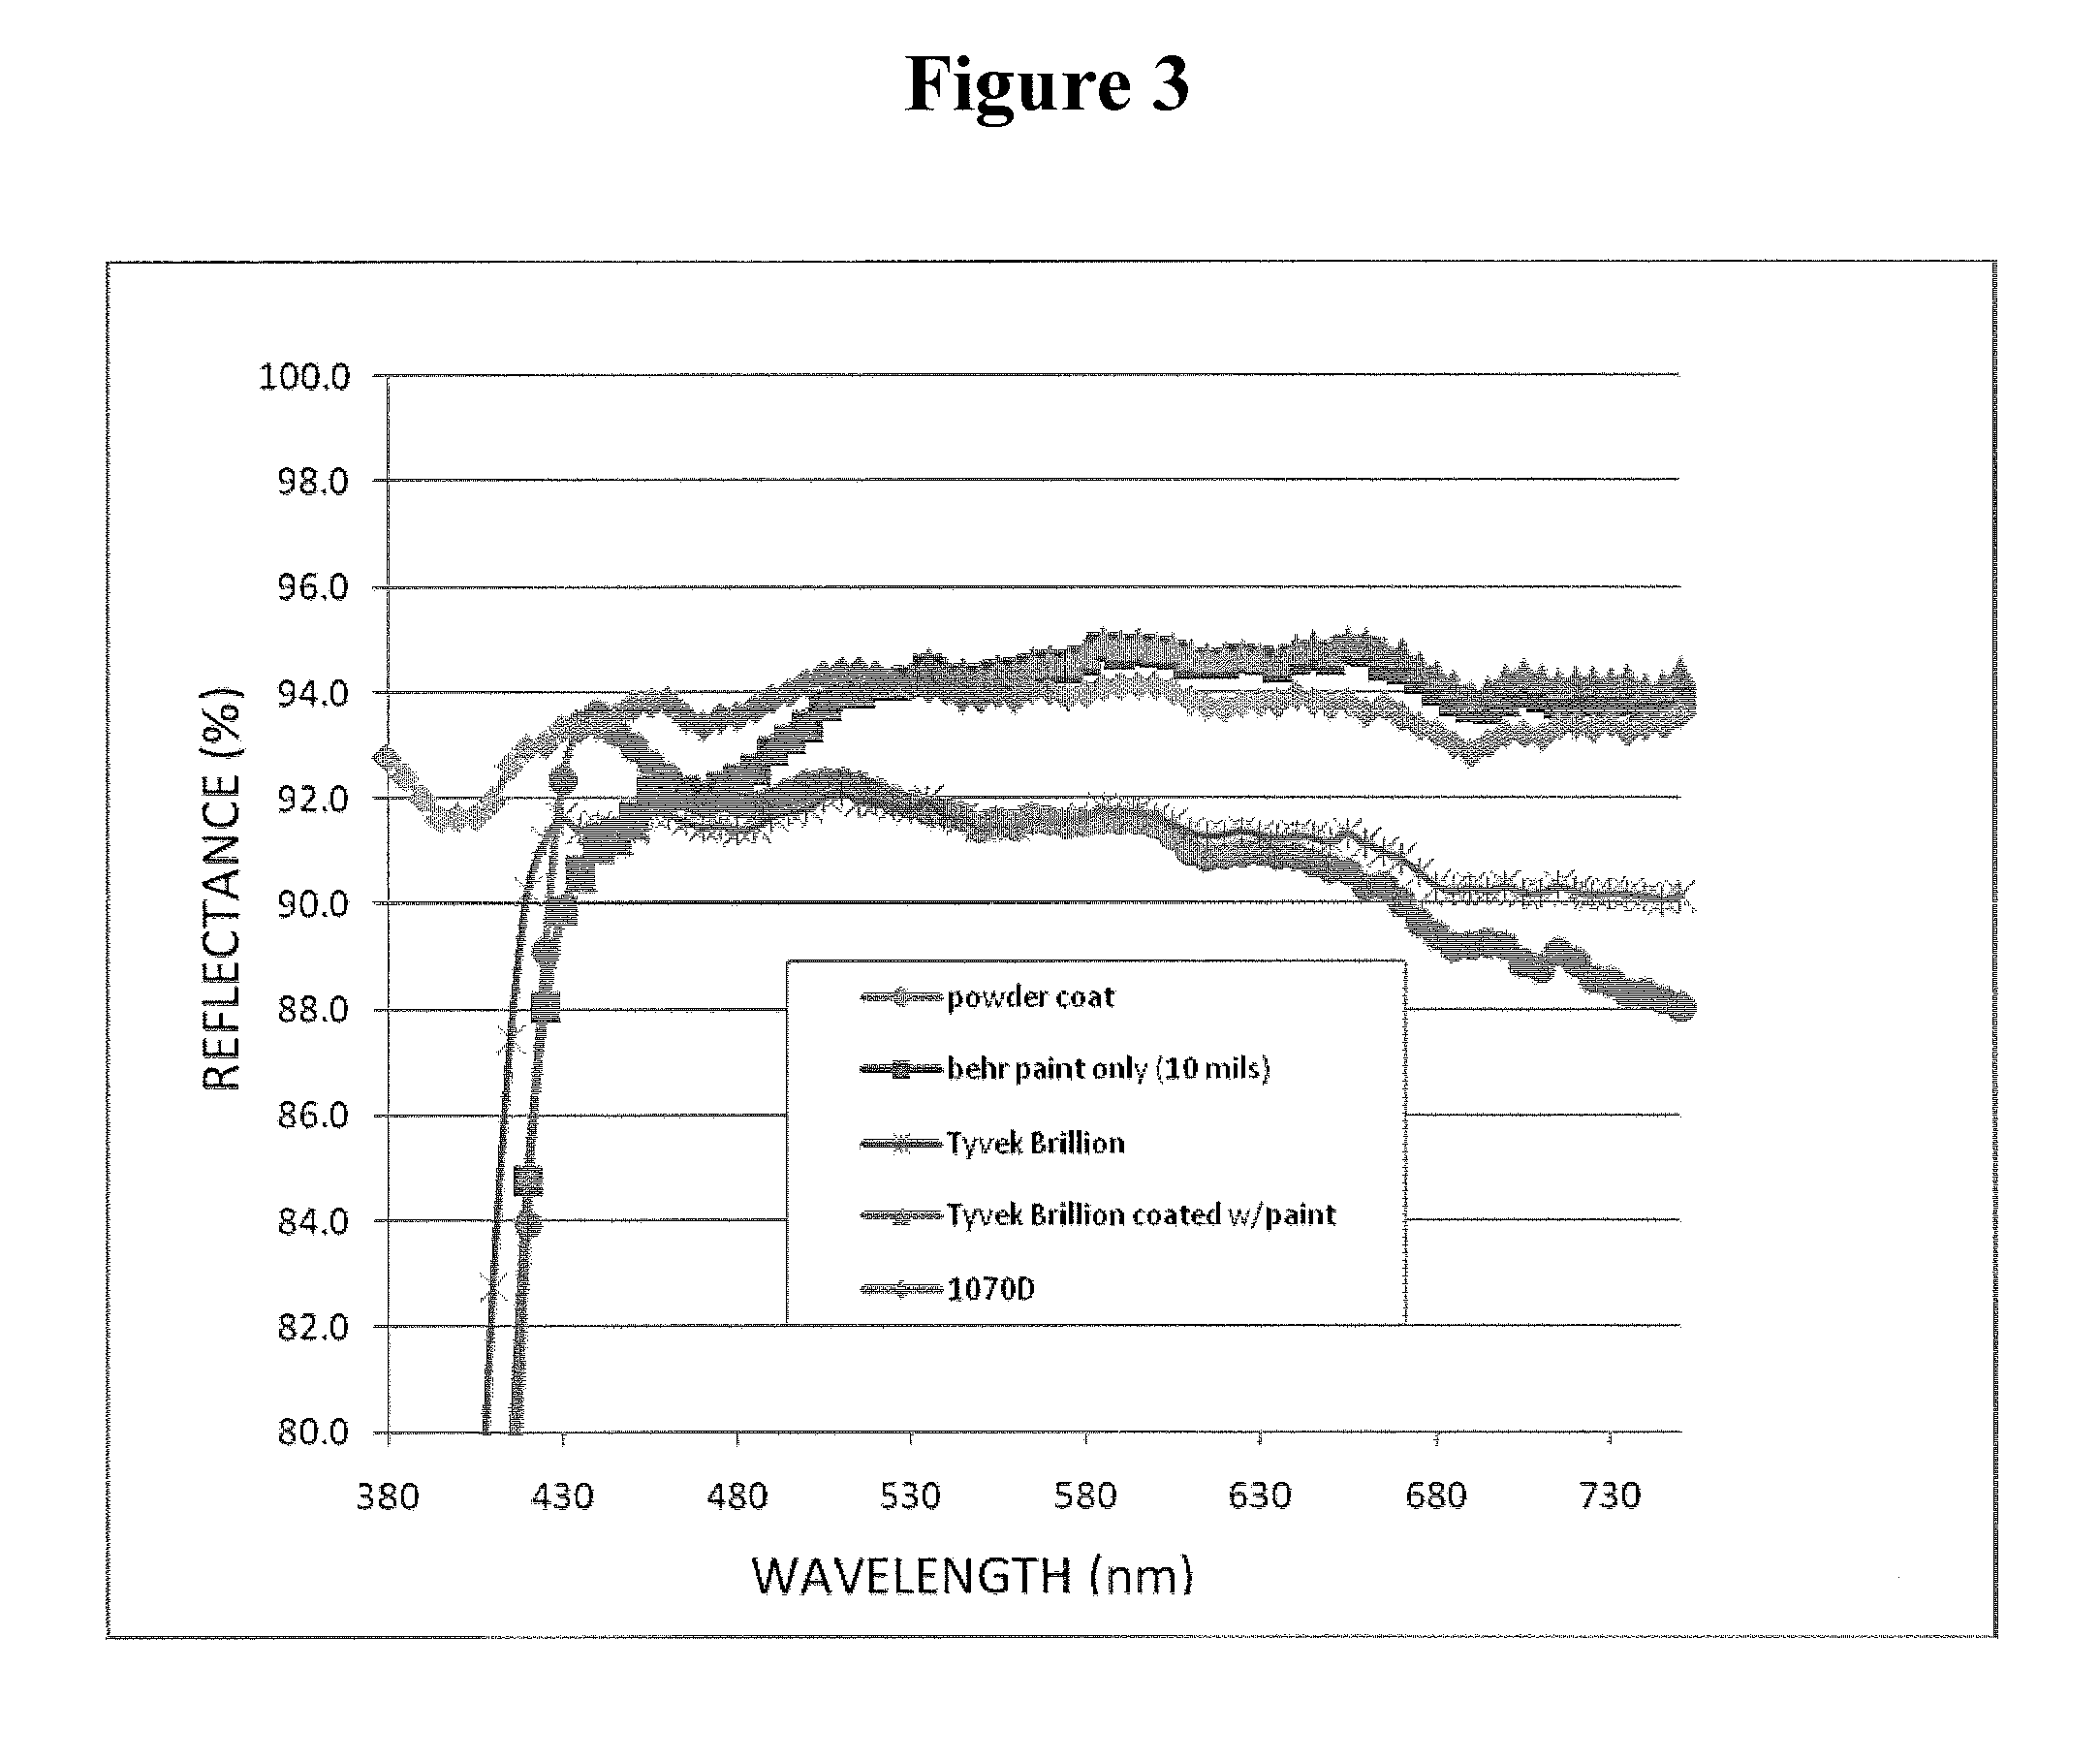 Diffusively light reflective paint composition, method for making paint composition, and diffusively light reflective articles